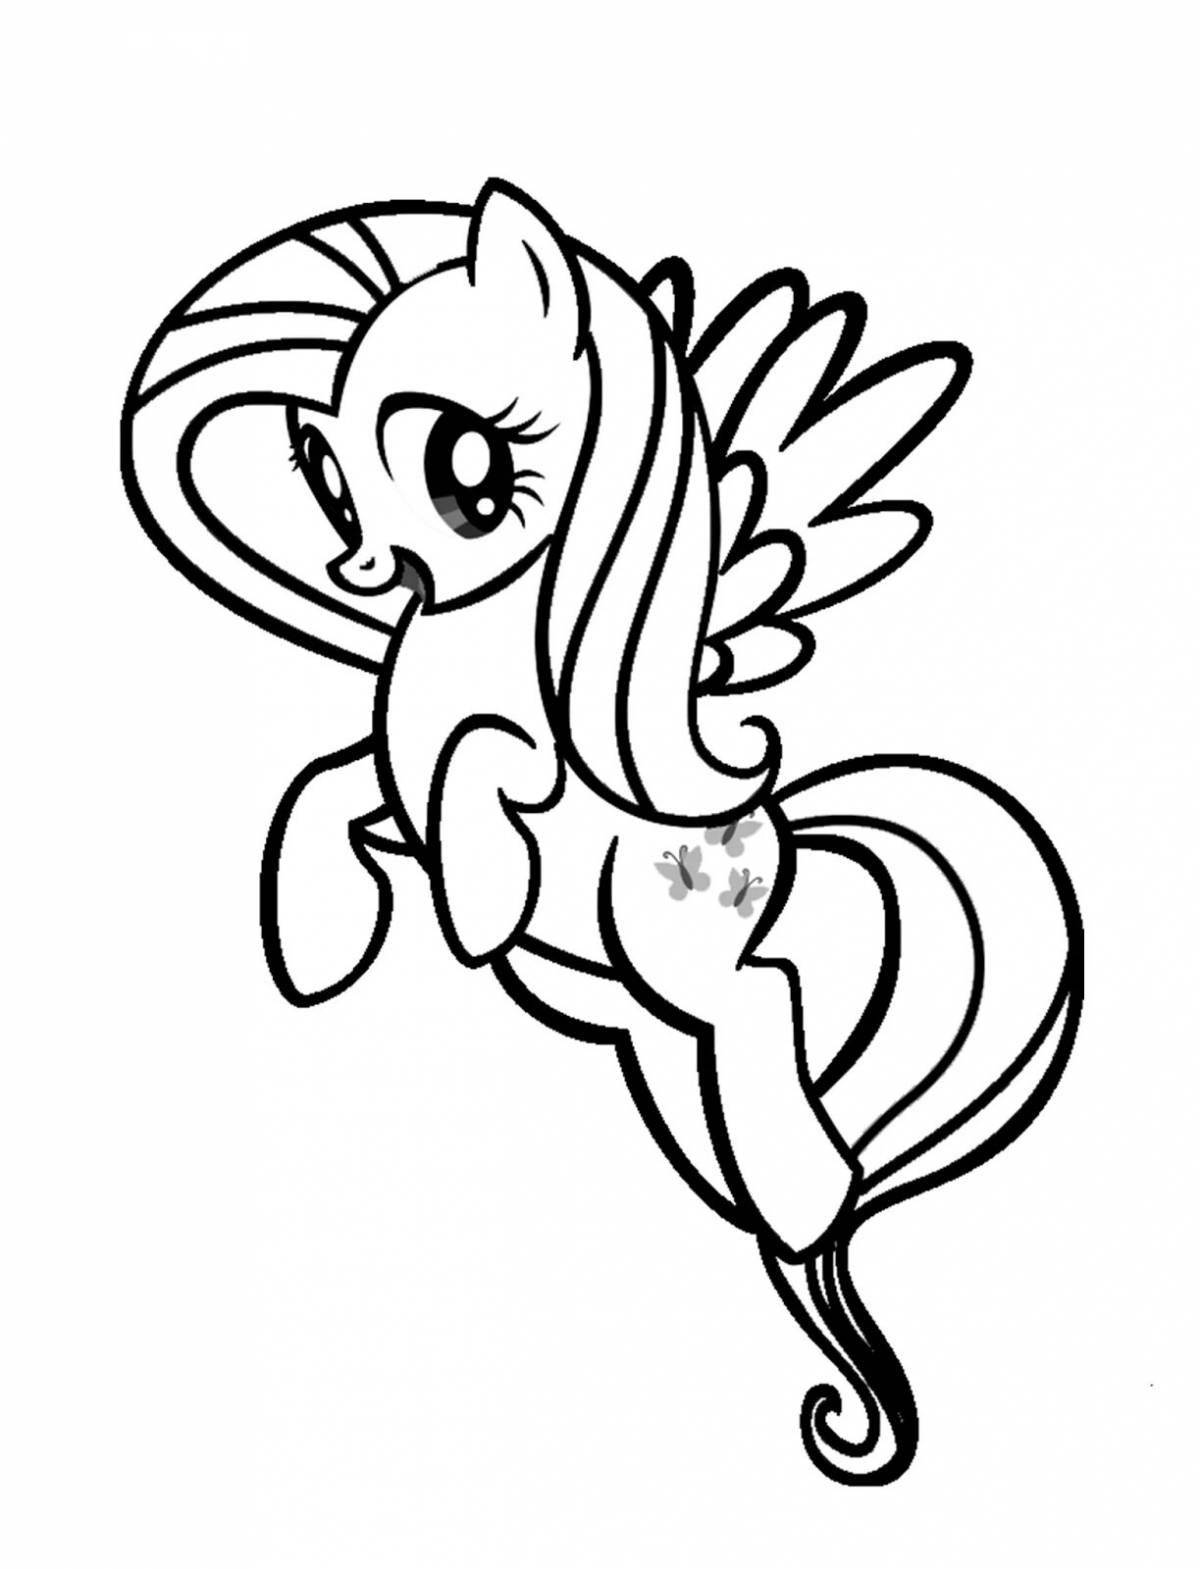 Brilliant pony watershine coloring page